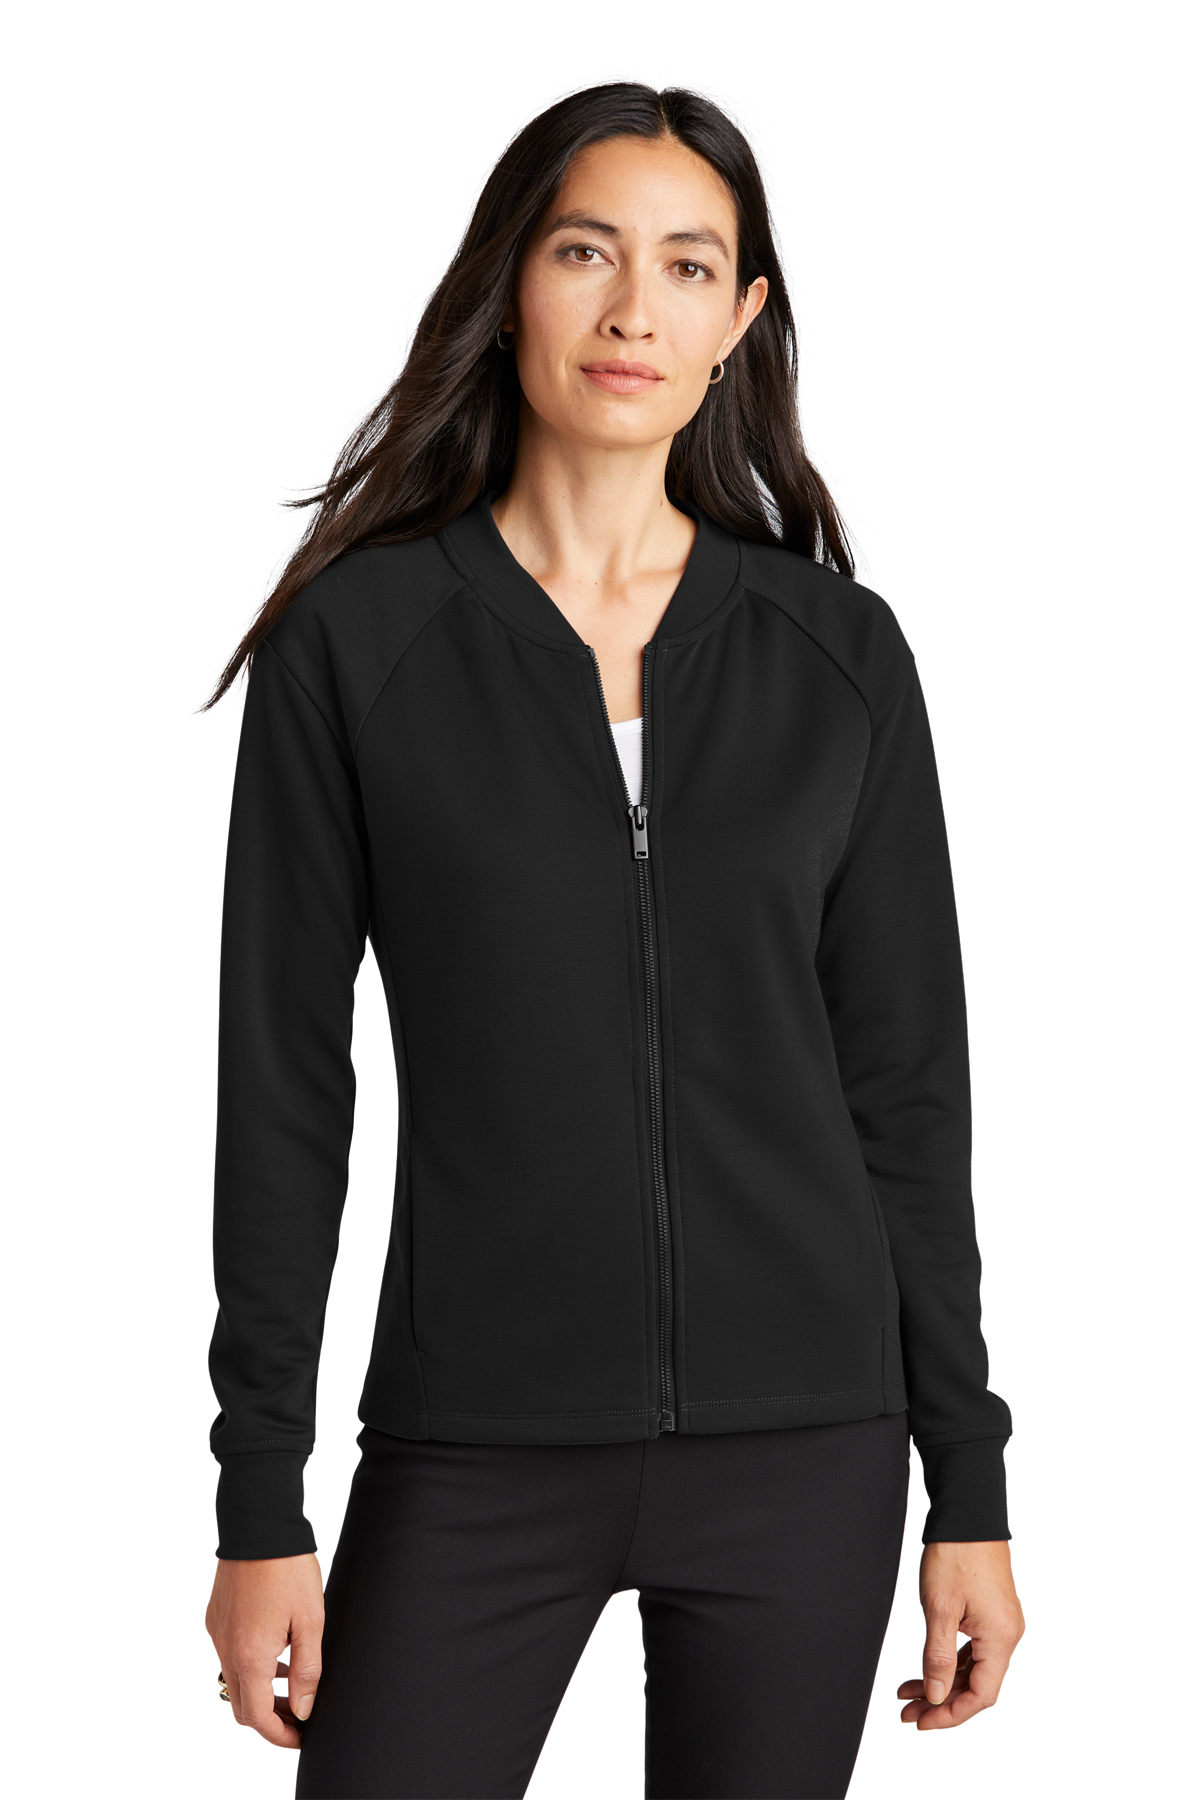 Mercer+Mettle Women's Double-Knit Bomber | Product | Company Casuals